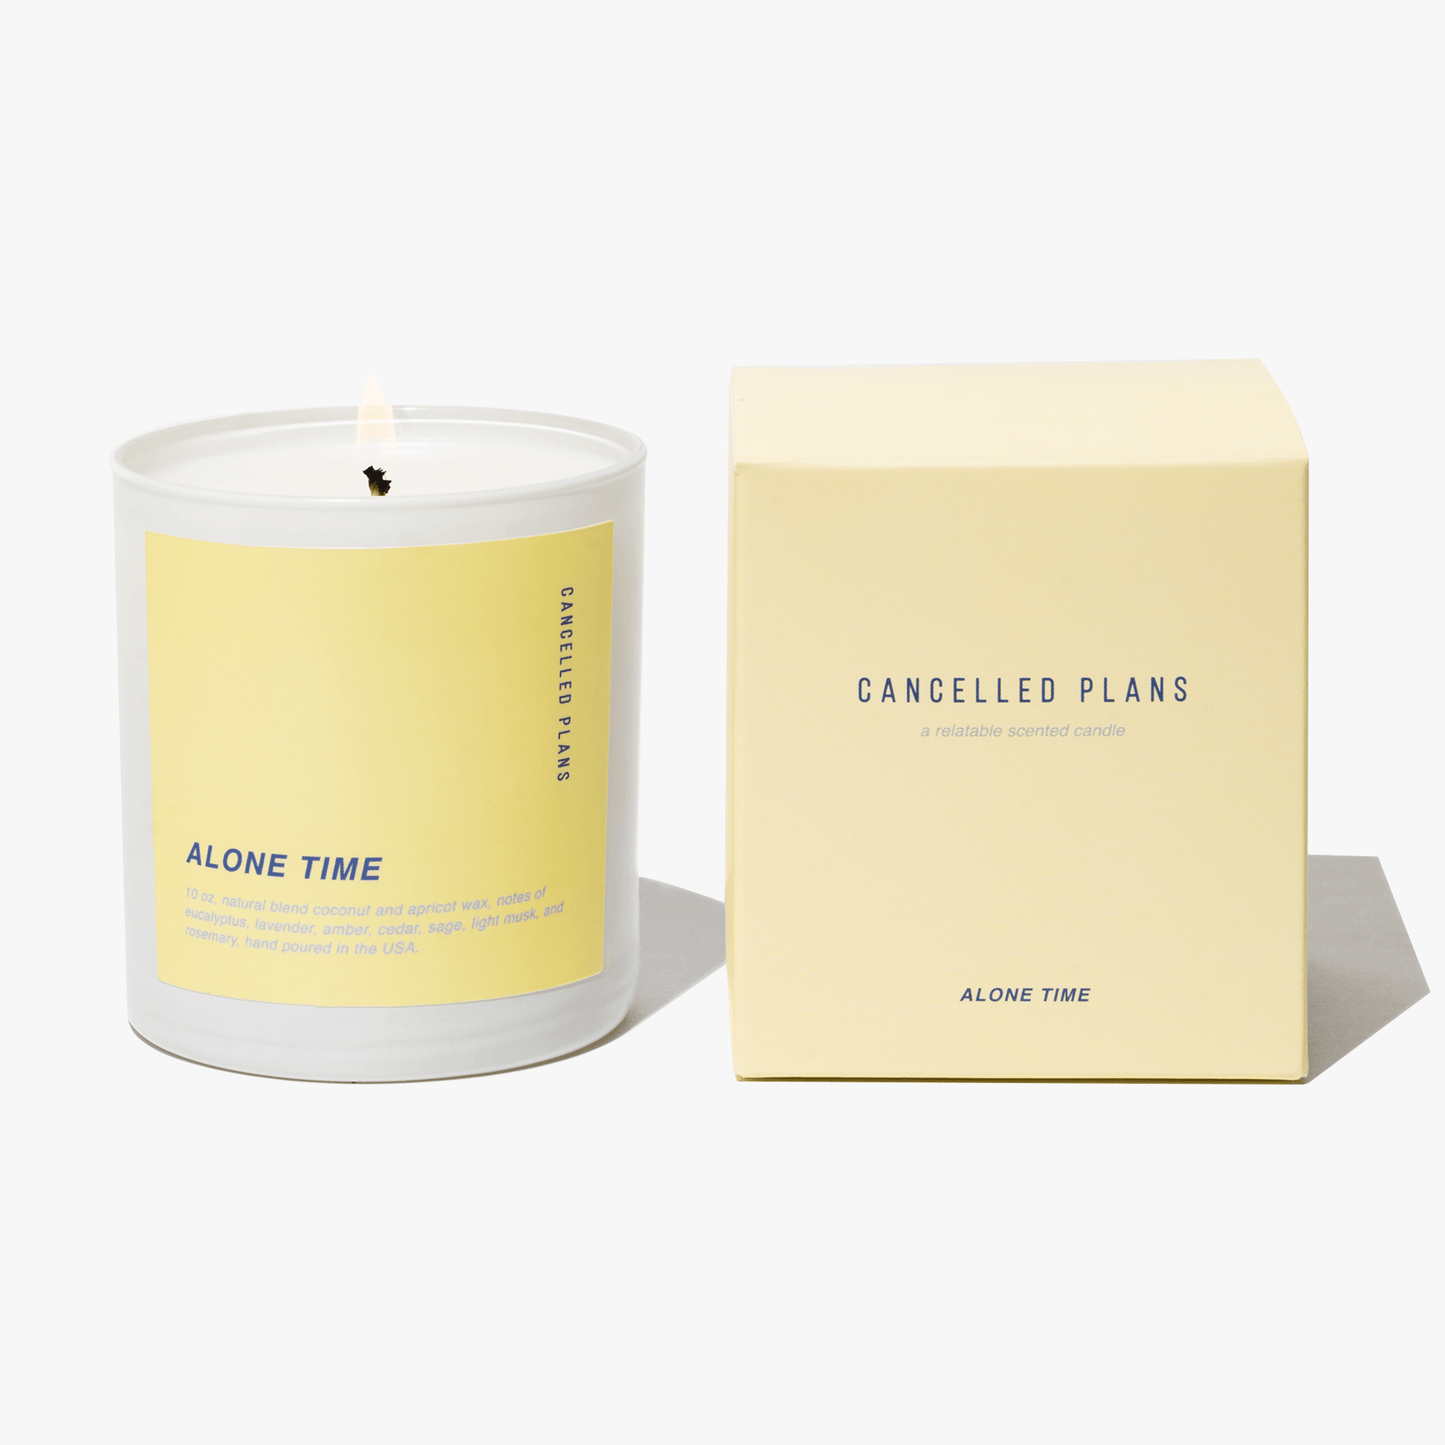 Alone Time Scented Candle by Cancelled Plans